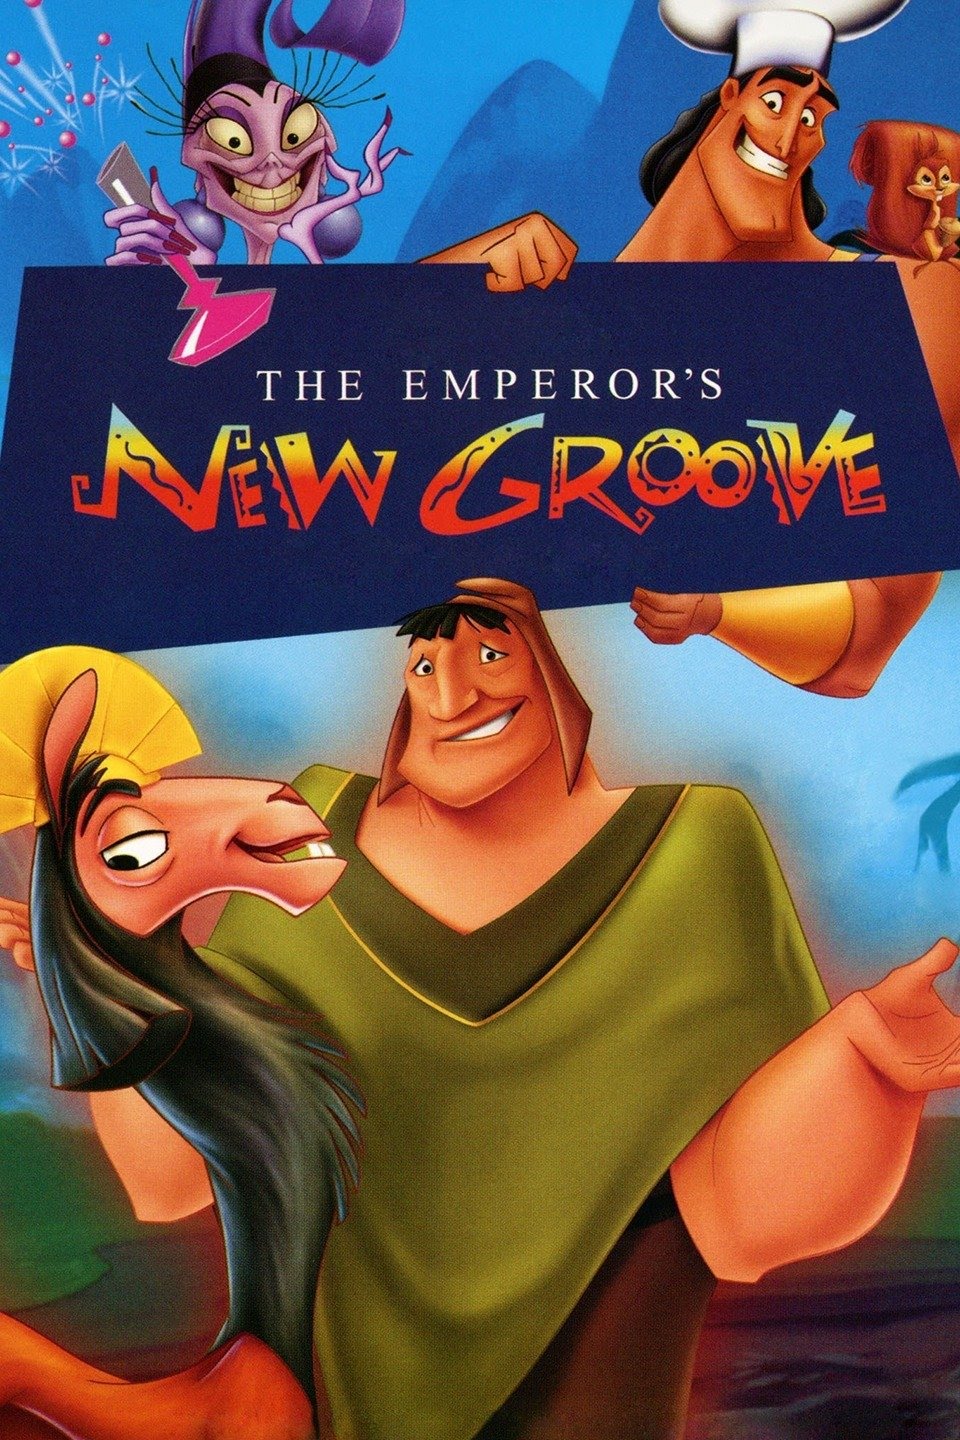 The Emperor’s New Groove (2000) Vudu or Movies Anywhere HD redemption only